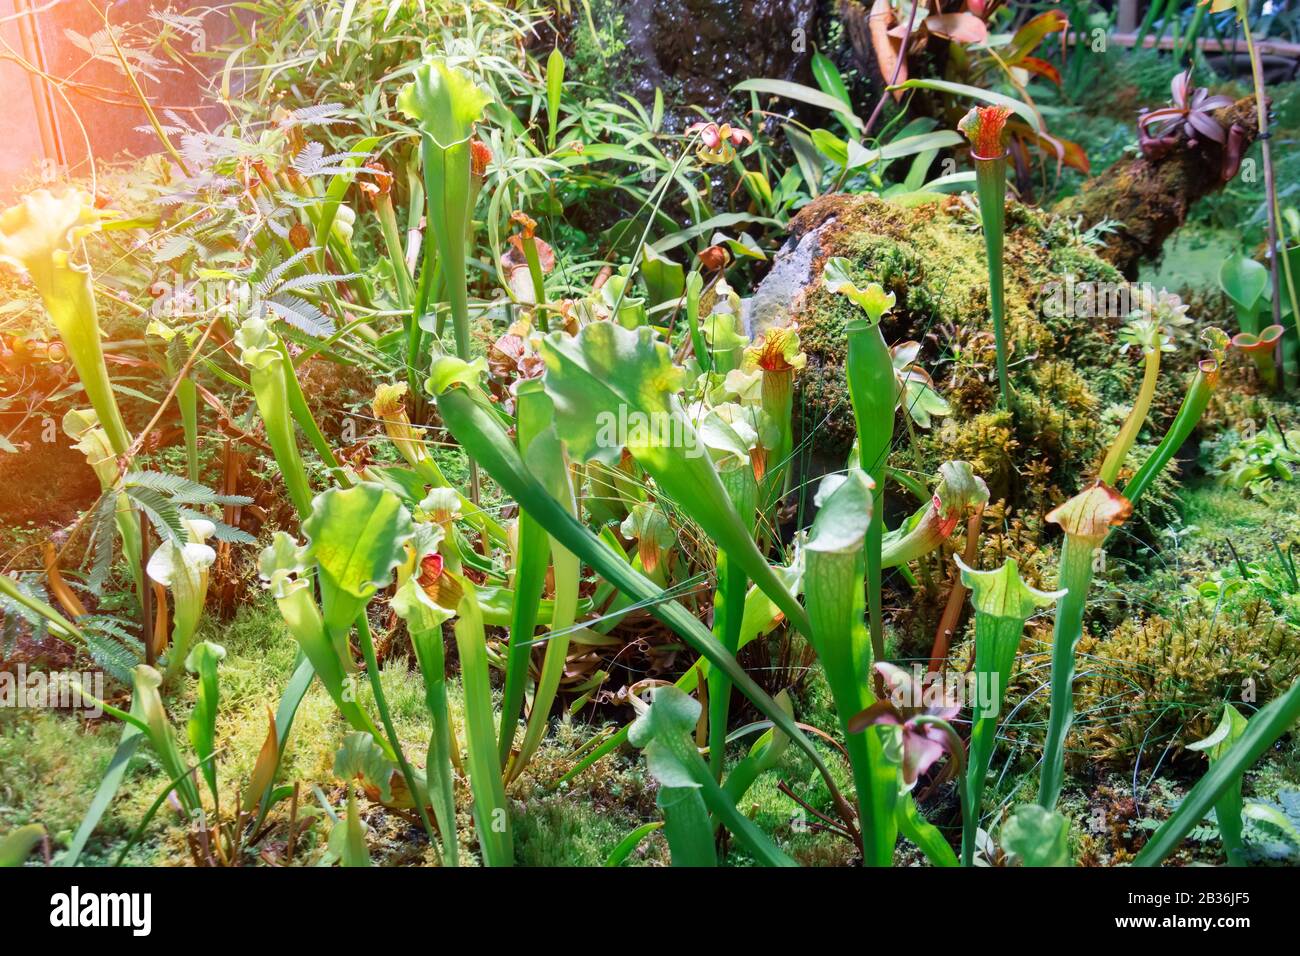 Sarracenia insect eating plant growing in garden Stock Photo